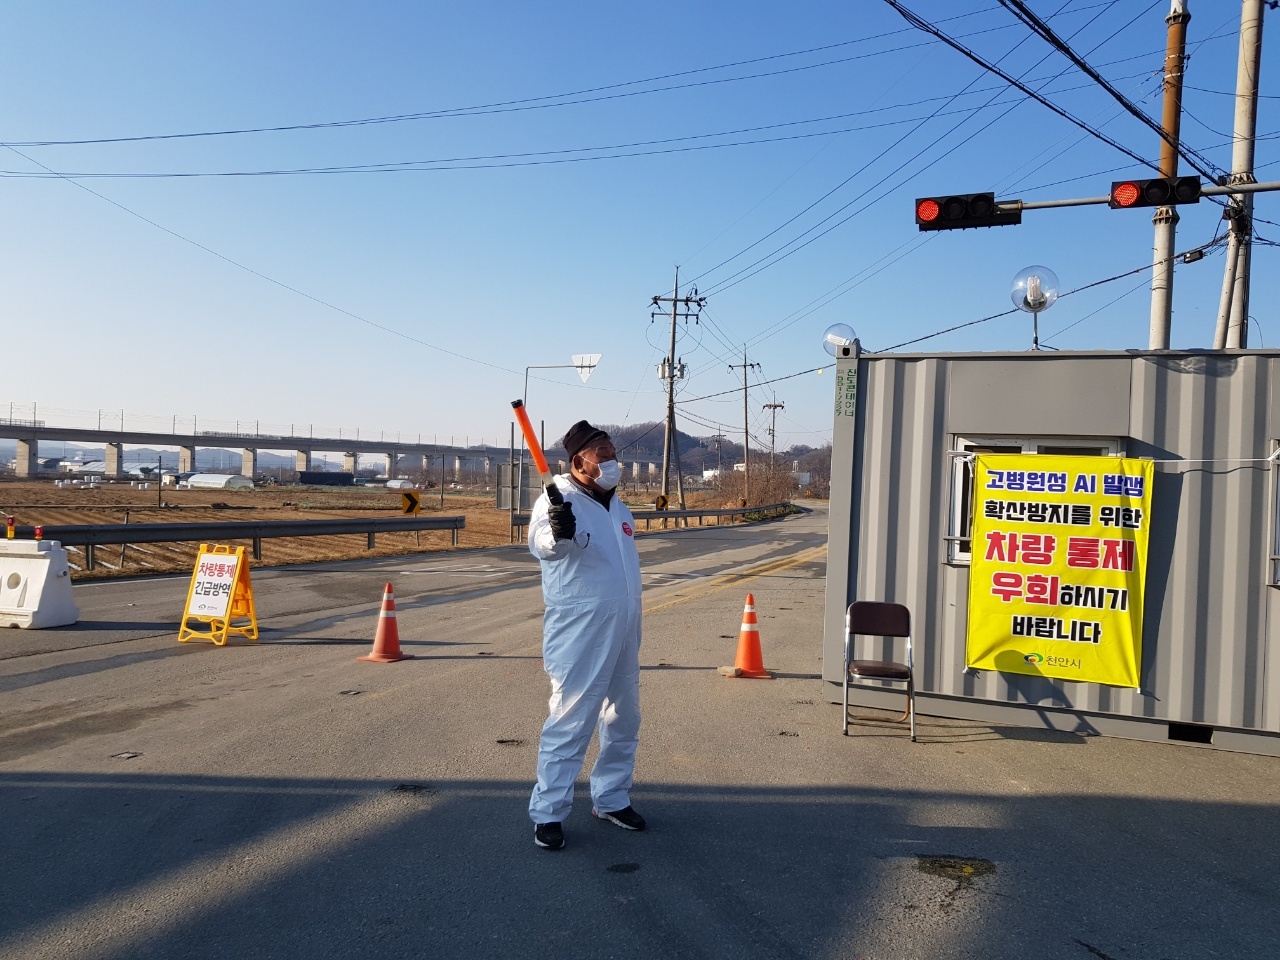 A quarantine worker is seen controlling traffic near an egg farm in Cheonan, South Chungcheong Province, in the wake of the outbreak of the bird flu, on Dec. 5. (Yonhap)